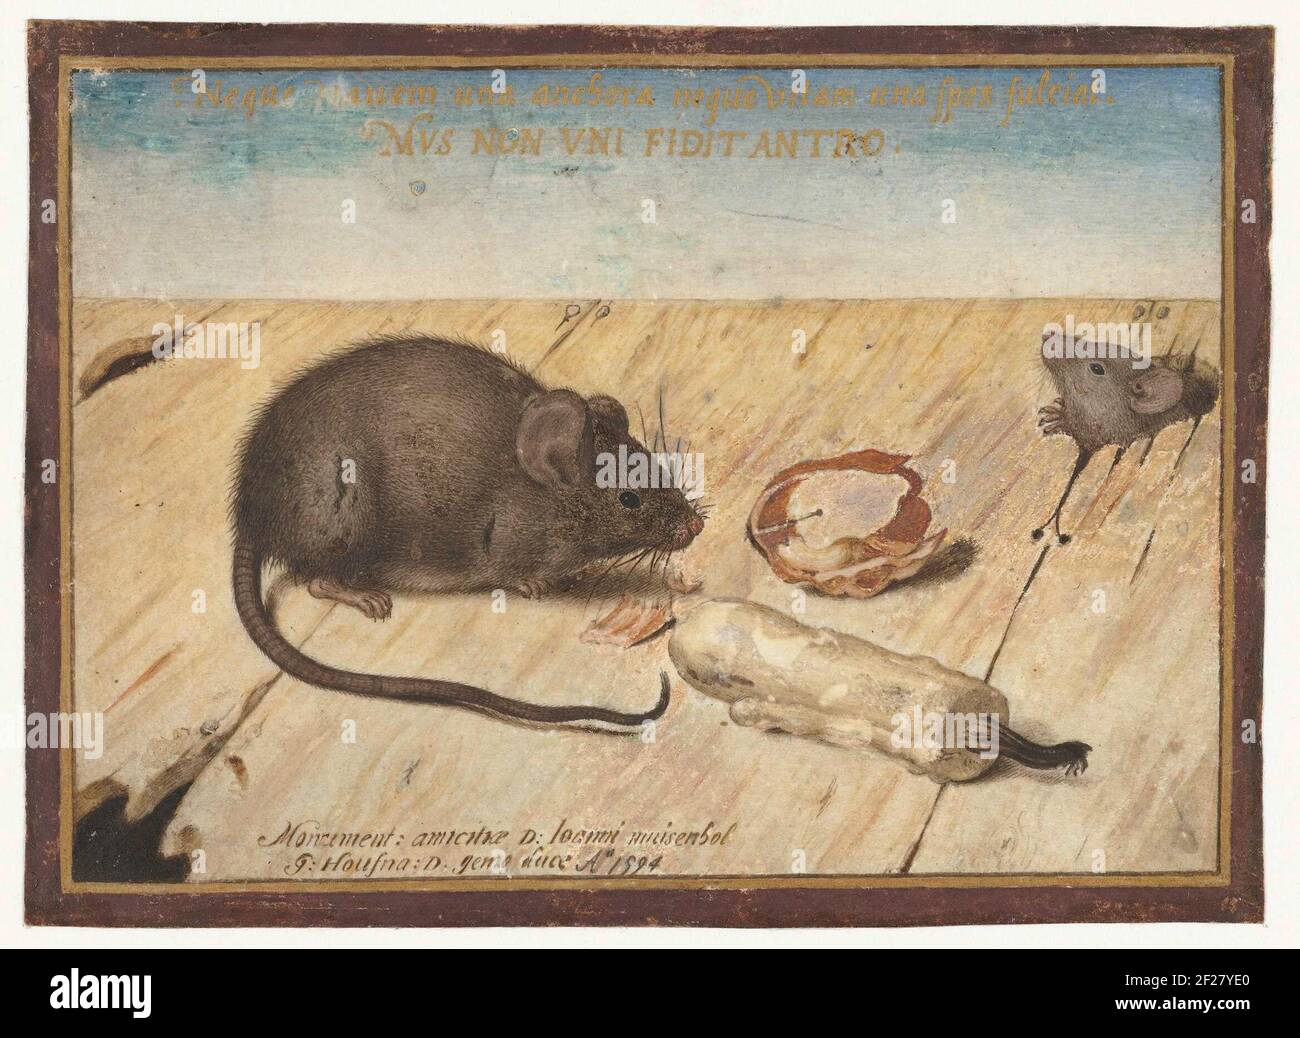 Two Mice.This drawing was specially made by Joris Hoefnagel for his friend Johannes Muisenhol from Frankfurt. The scene refers to his surname (mouse hole), while the extinguished candle and the gnawed walnut stand for the transience of life. Symbolism played an important role in the 16th century. The artist also had a keen eye for the faithful depiction of the mice. Stock Photo